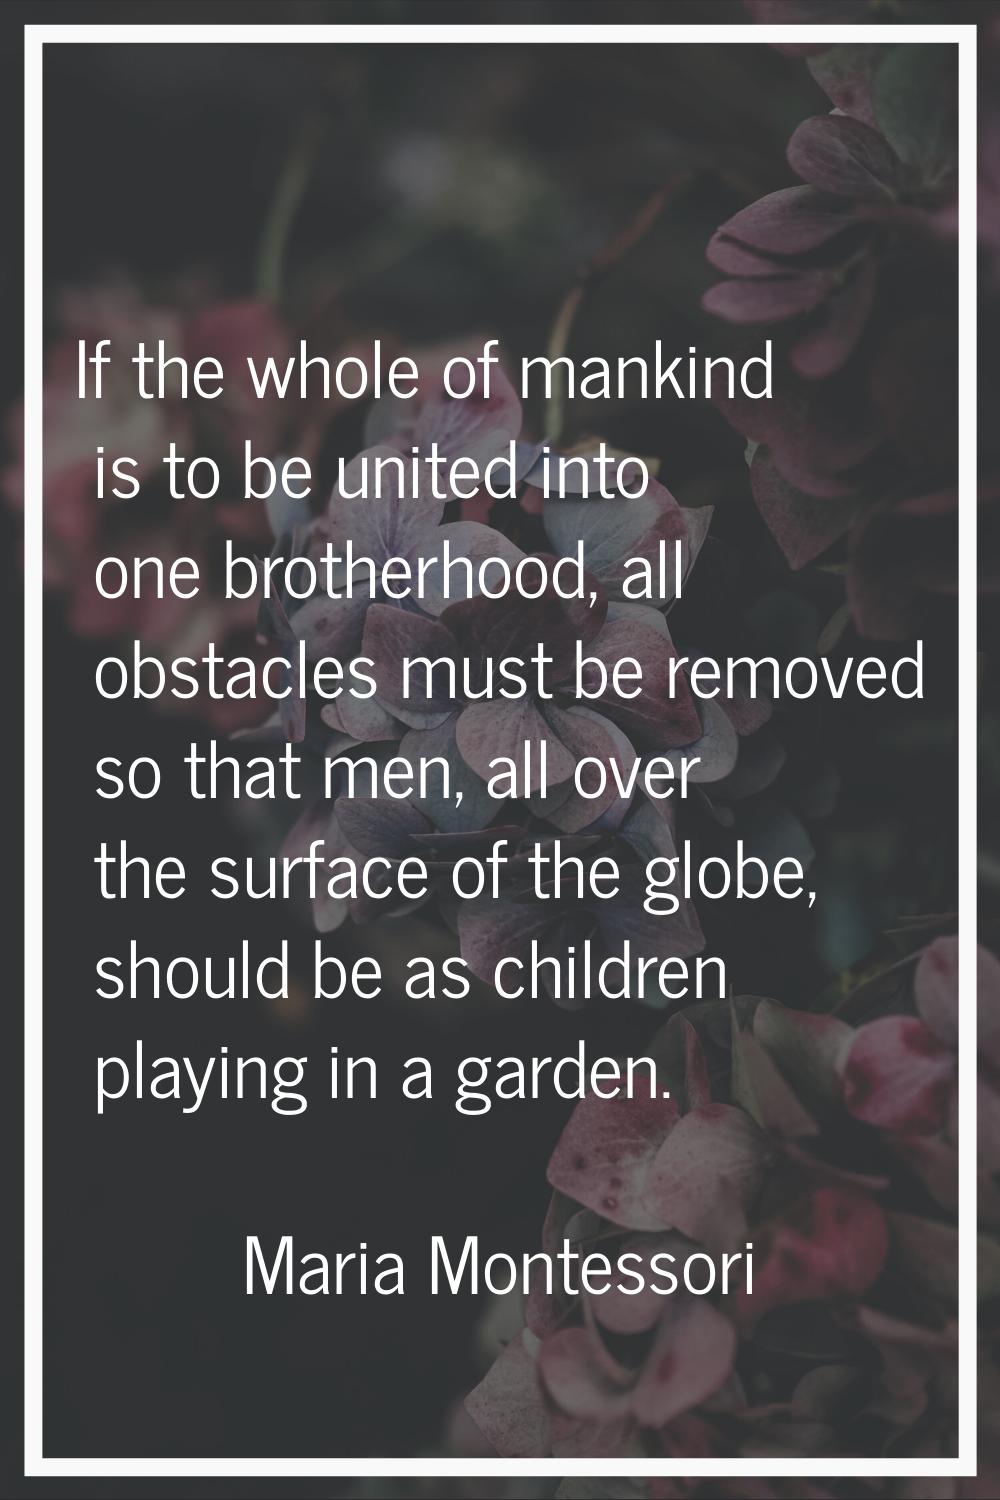 If the whole of mankind is to be united into one brotherhood, all obstacles must be removed so that